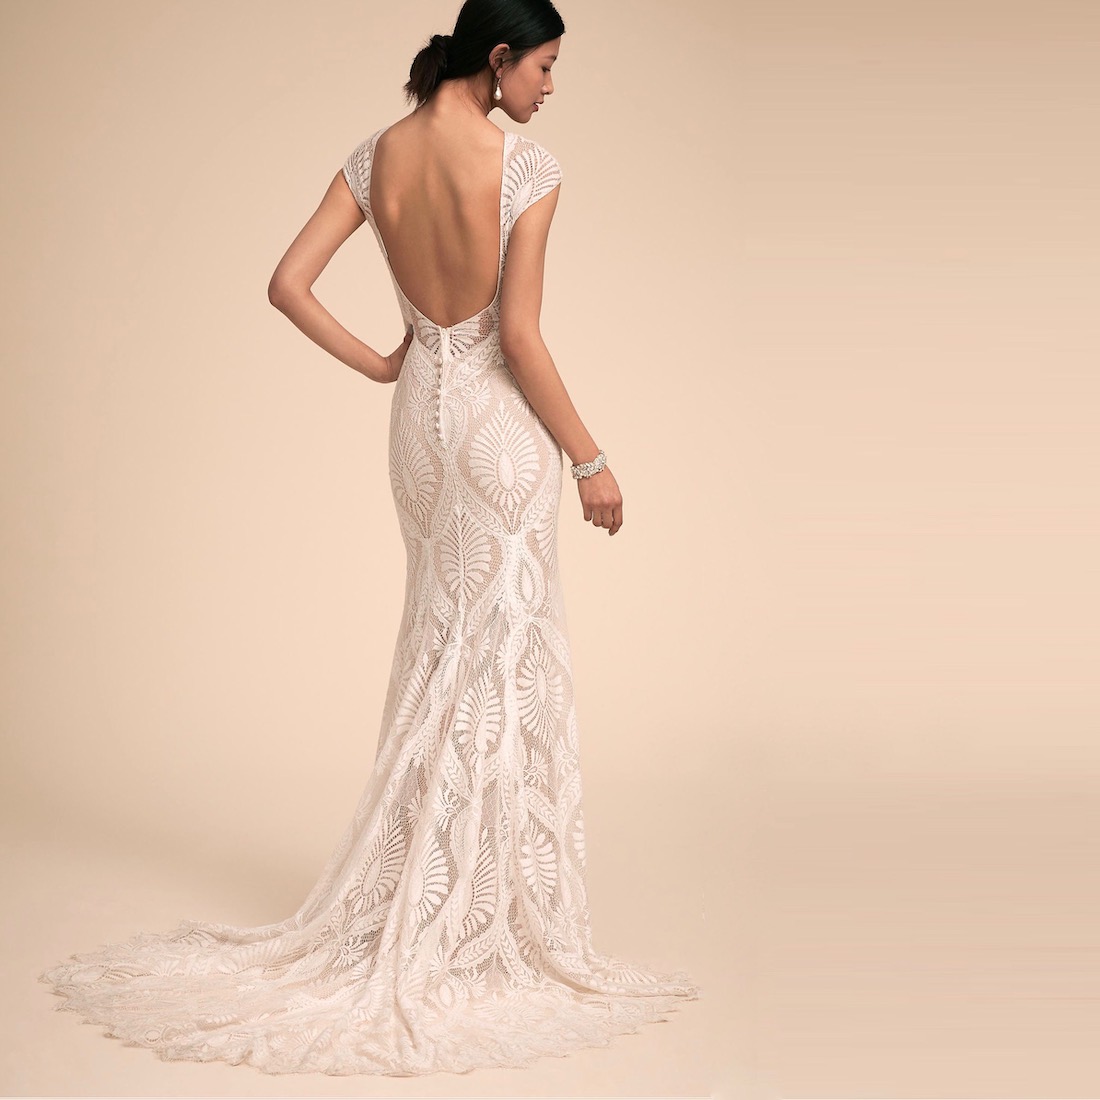 Lace Cap Sleeve Wedding Dress Outlet ...